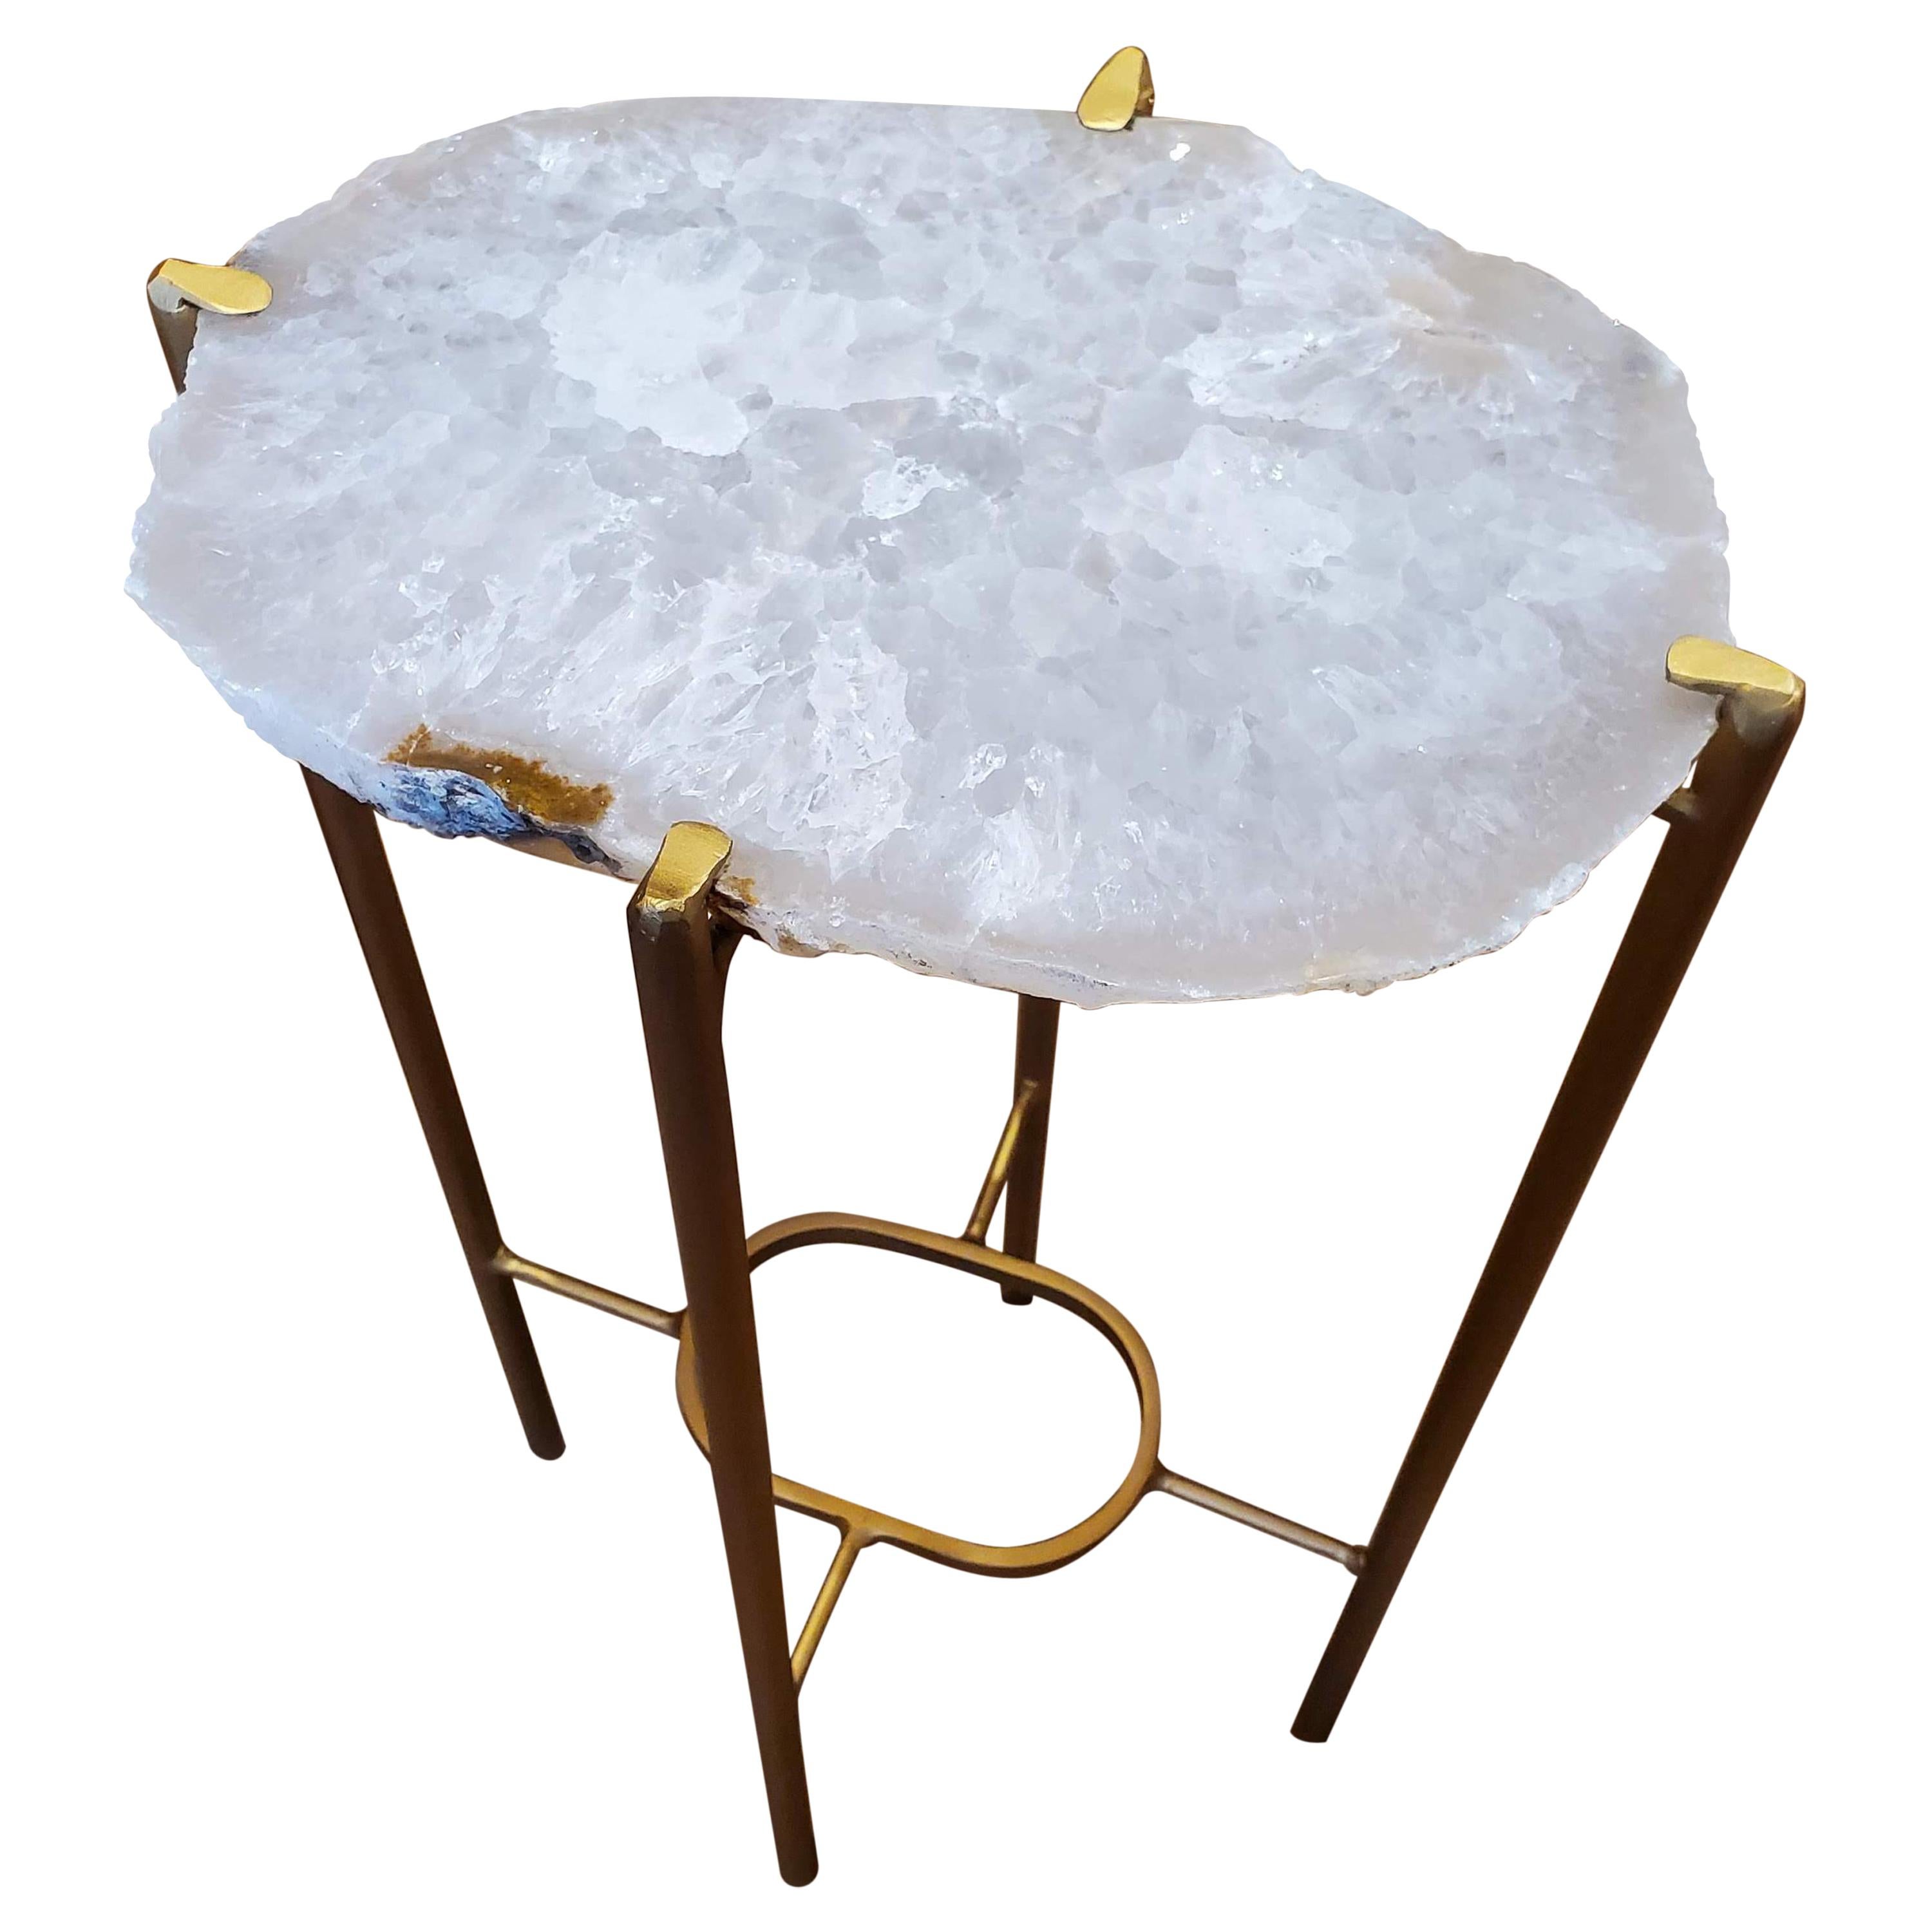 Organic Modern Clear and White Quartzite Geode Drink Table with Gold Gilt Base